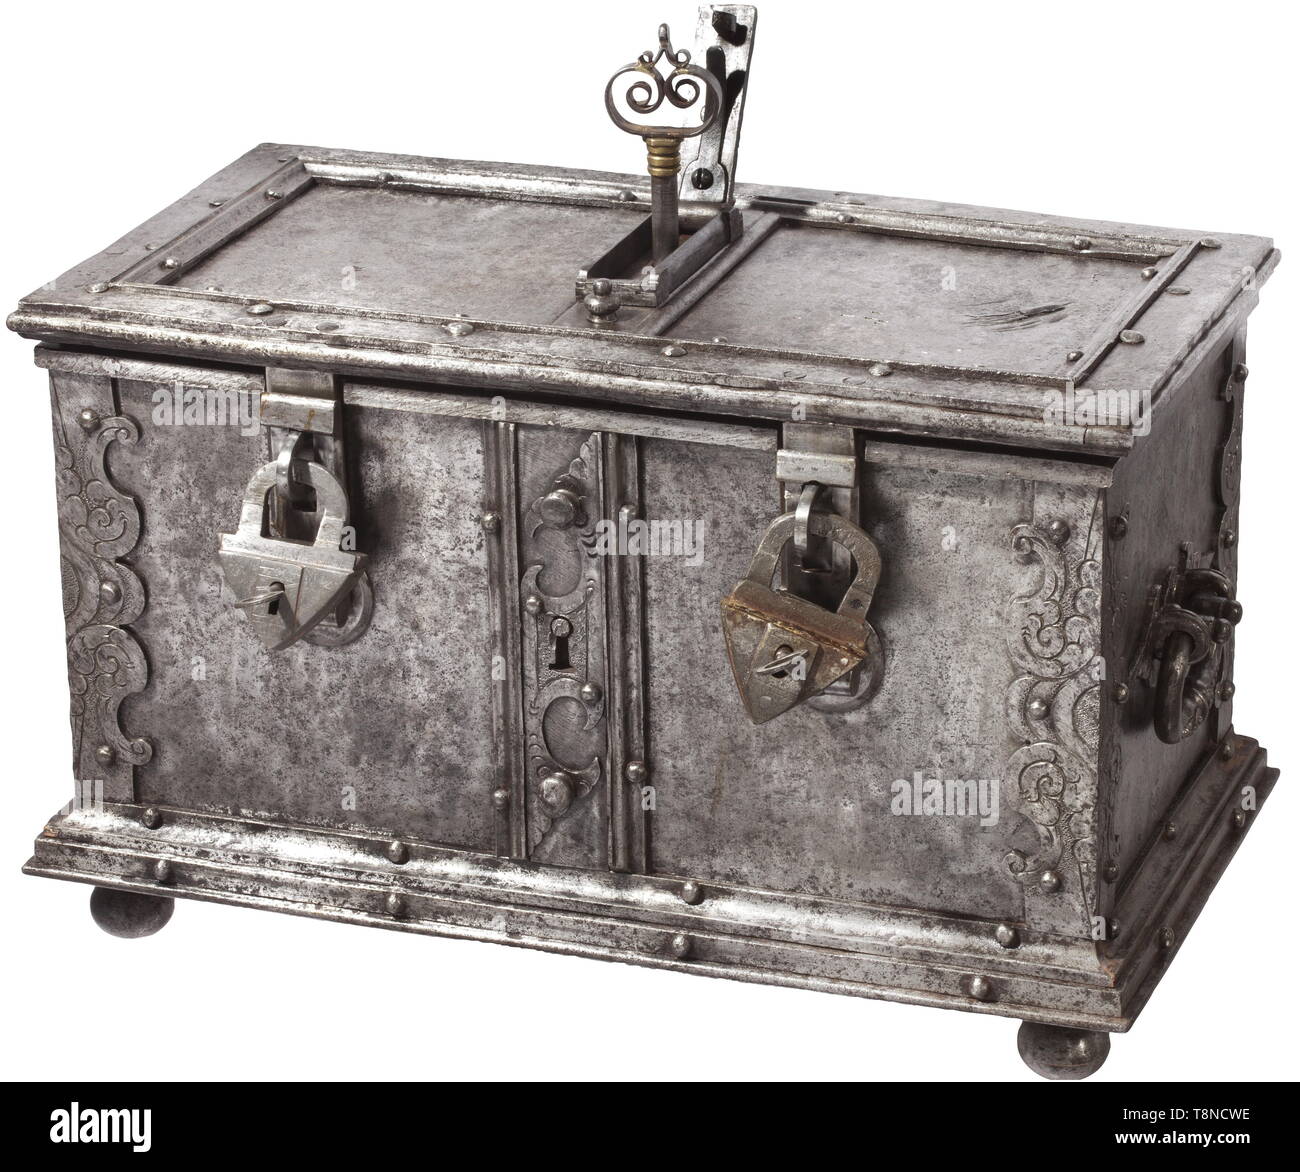 A heavy Southern German iron casket, presumably Nuremberg, circa 1620 Rectangular sheet iron body, reinforced edges with engraved and embossed decoration. Stepped base on four iron ball feet. False lock with curved escutcheon at the front, two hasps (partially replaced) with attached triangular locks (each one marked). The hinged lid with heavily reinforced edges. The cover of the central keyhole with hidden locking and spring-loaded lid. The inside with elaborate locking mechanism with tenfold locking. Replaced hollow shank key. Lavish openwork , Additional-Rights-Clearance-Info-Not-Available Stock Photo